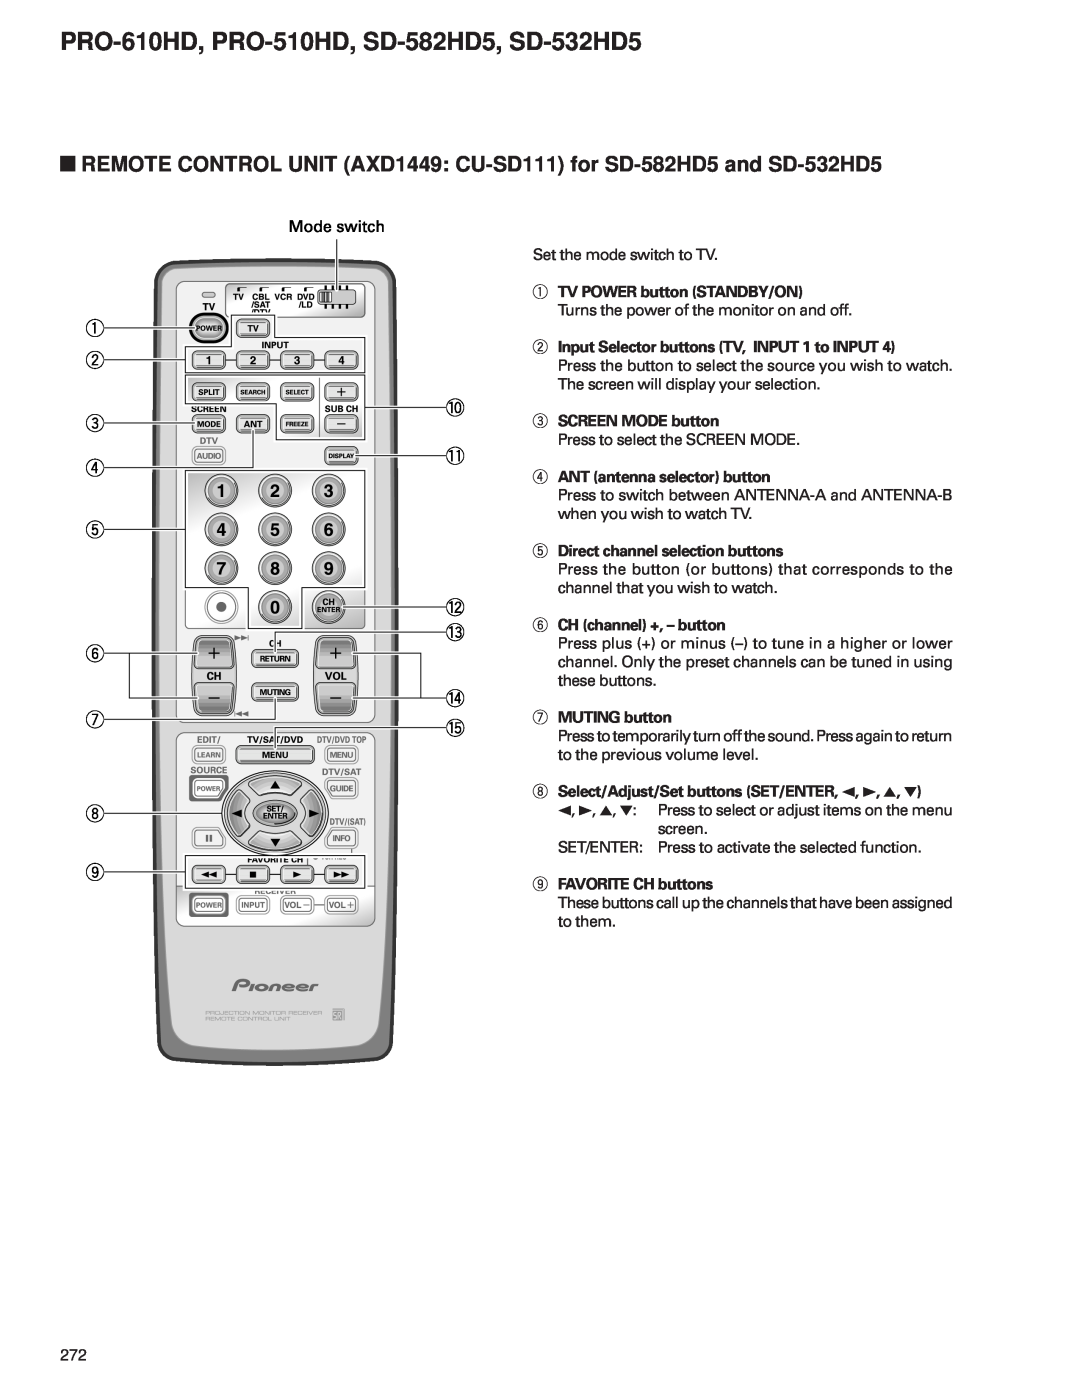 Pioneer PRO-610HD, PRO-510HD REMOTE CONTROL UNIT AXD1449 CU-SD111 for SD-582HD5 and SD-532HD5, TV POWER button STANDBY/ON 